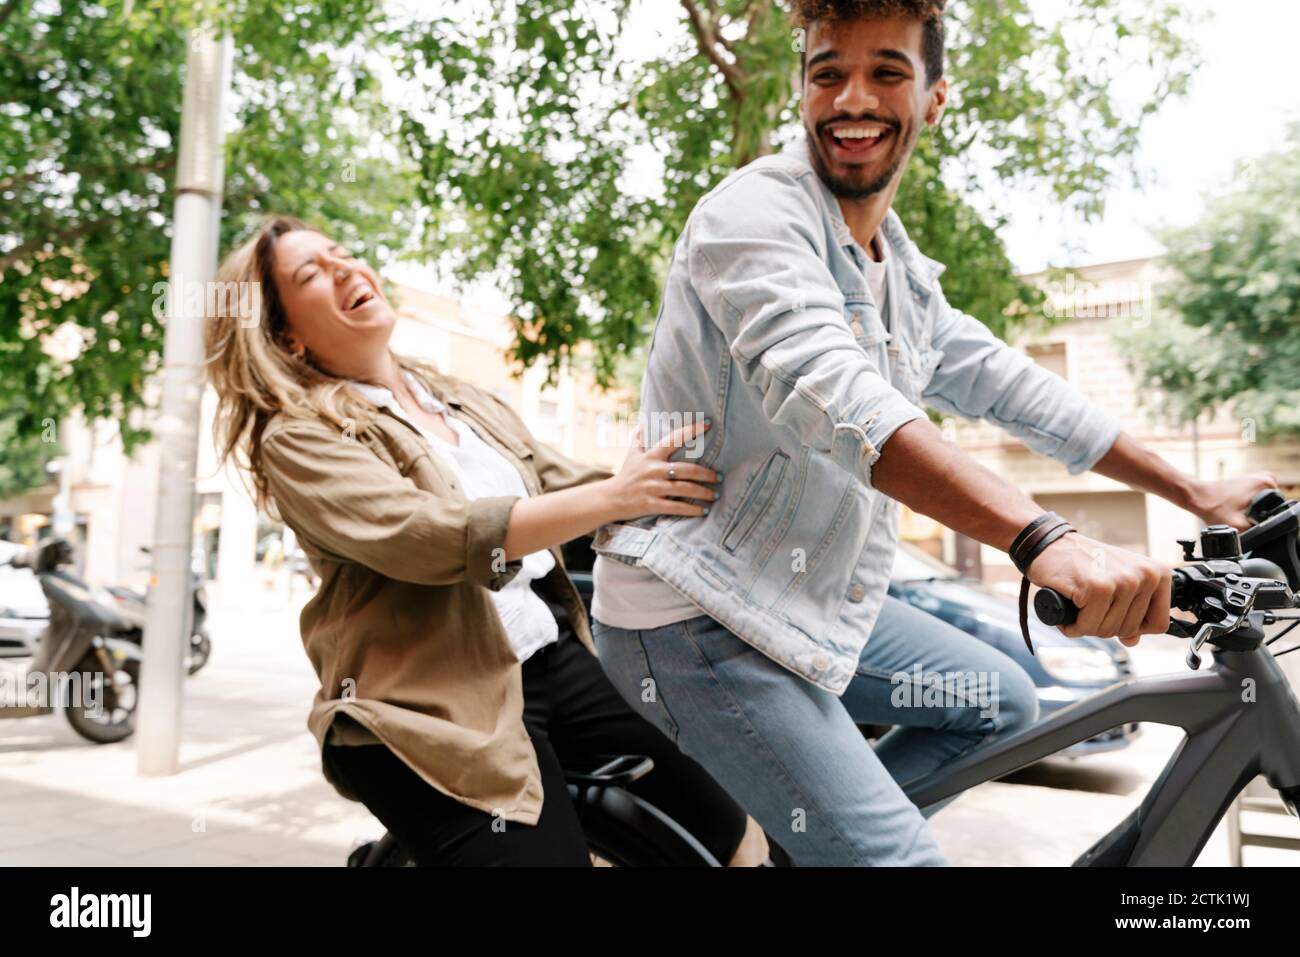 Cheerful young couple enjoying ride on electric bicycle in city Stock Photo